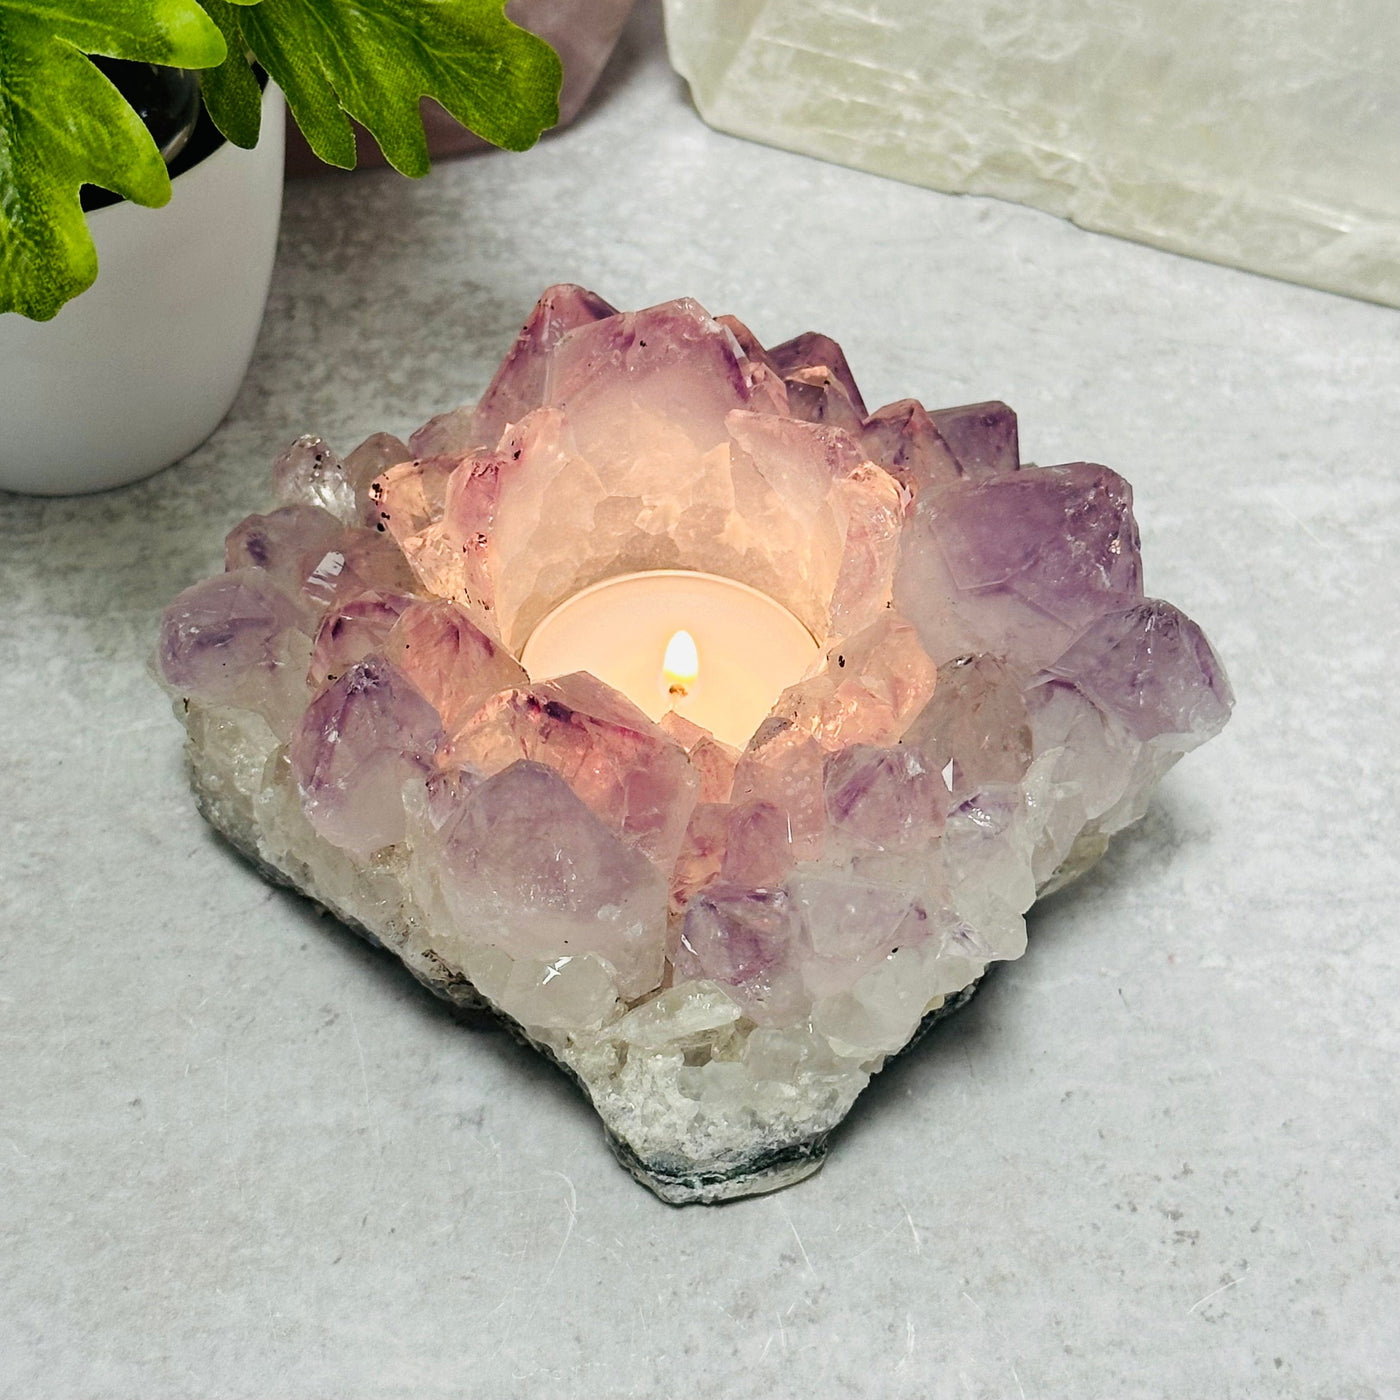 amethyst candle holder displayed as home decor 